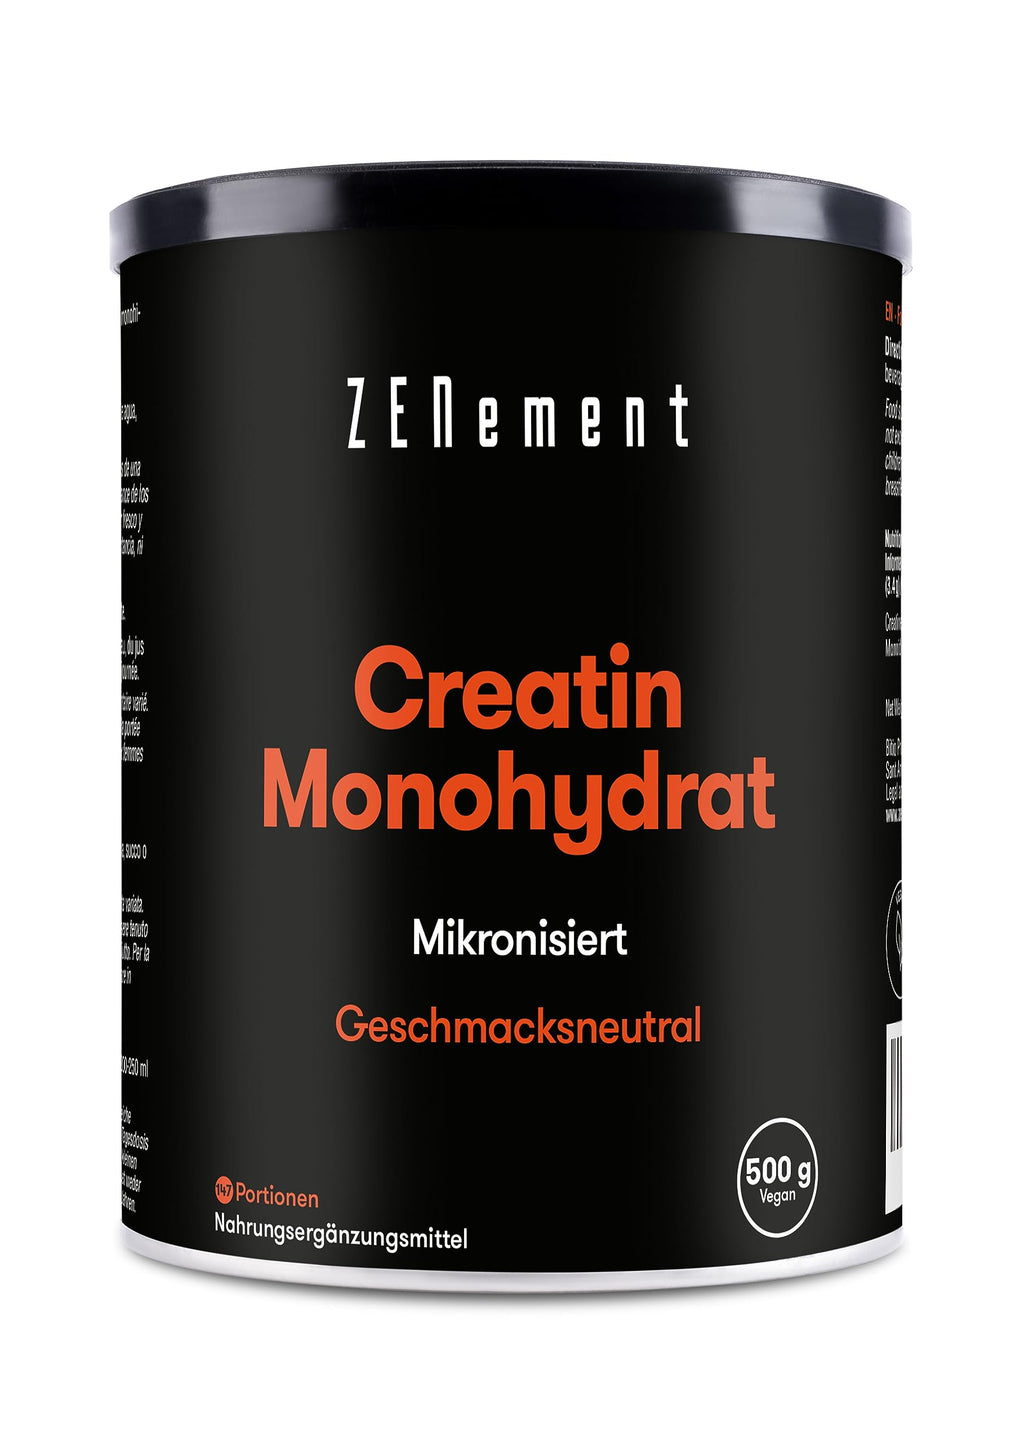 Creatine Monohydrate Powder 500 G, Creatine Monohydrate In Micronized Quality With Optimal High Dose | Pure, 100% Vegan, No Additives | For 147 Applications Zenement - NewNest Australia